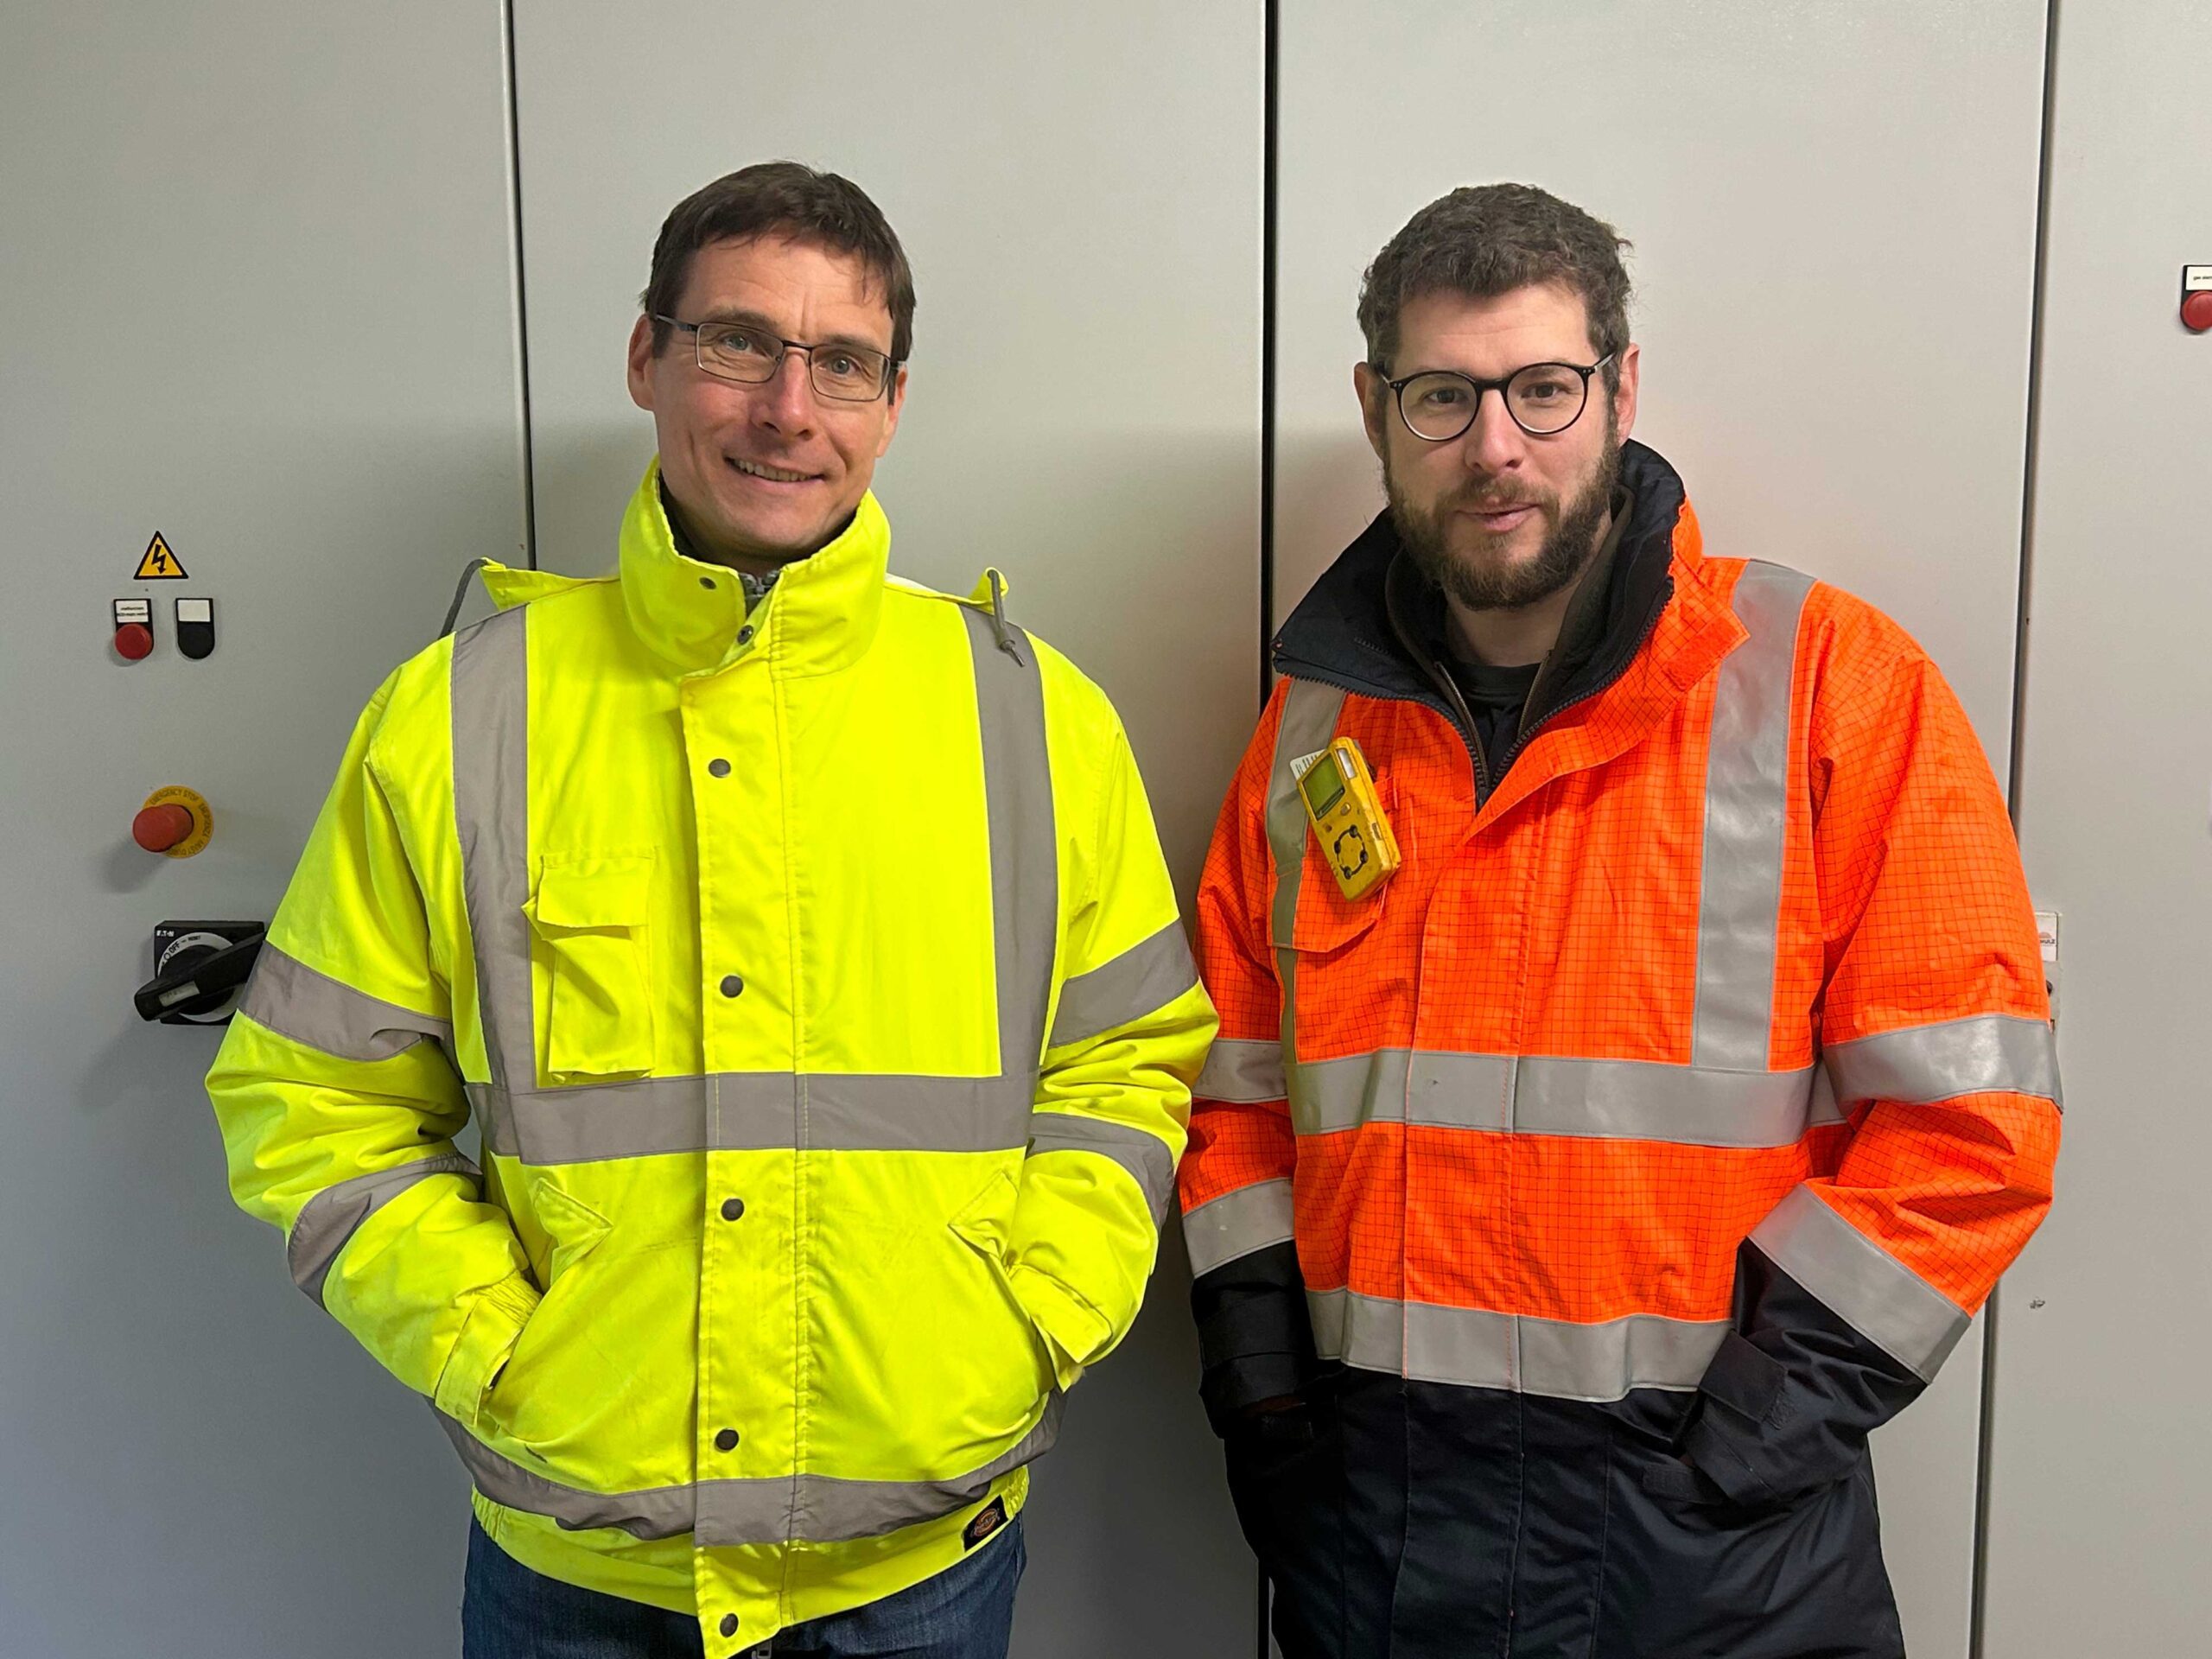 FM Bio employees in reflective safety jackets.